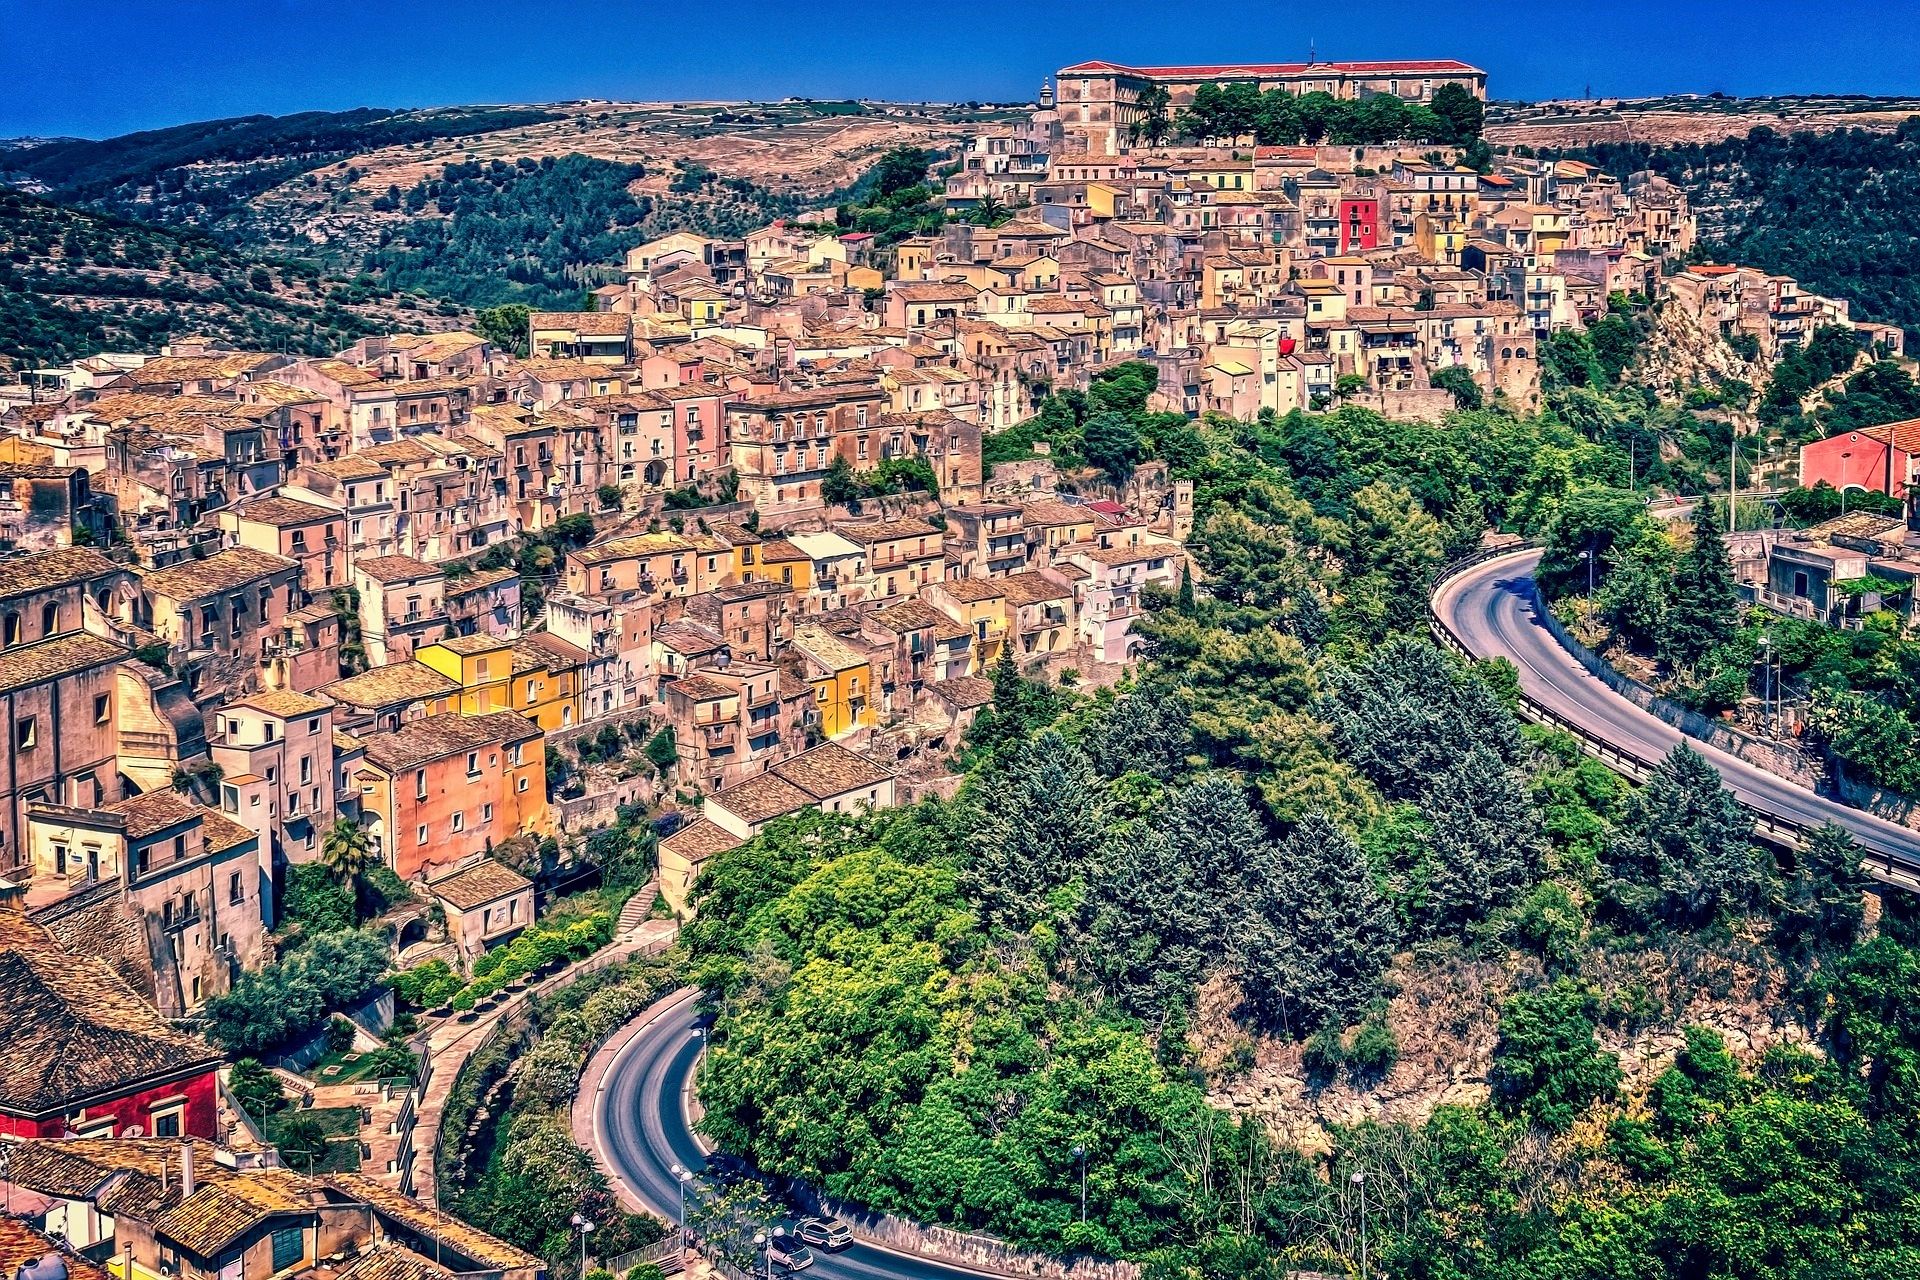 Off the beaten path locations in Sicily